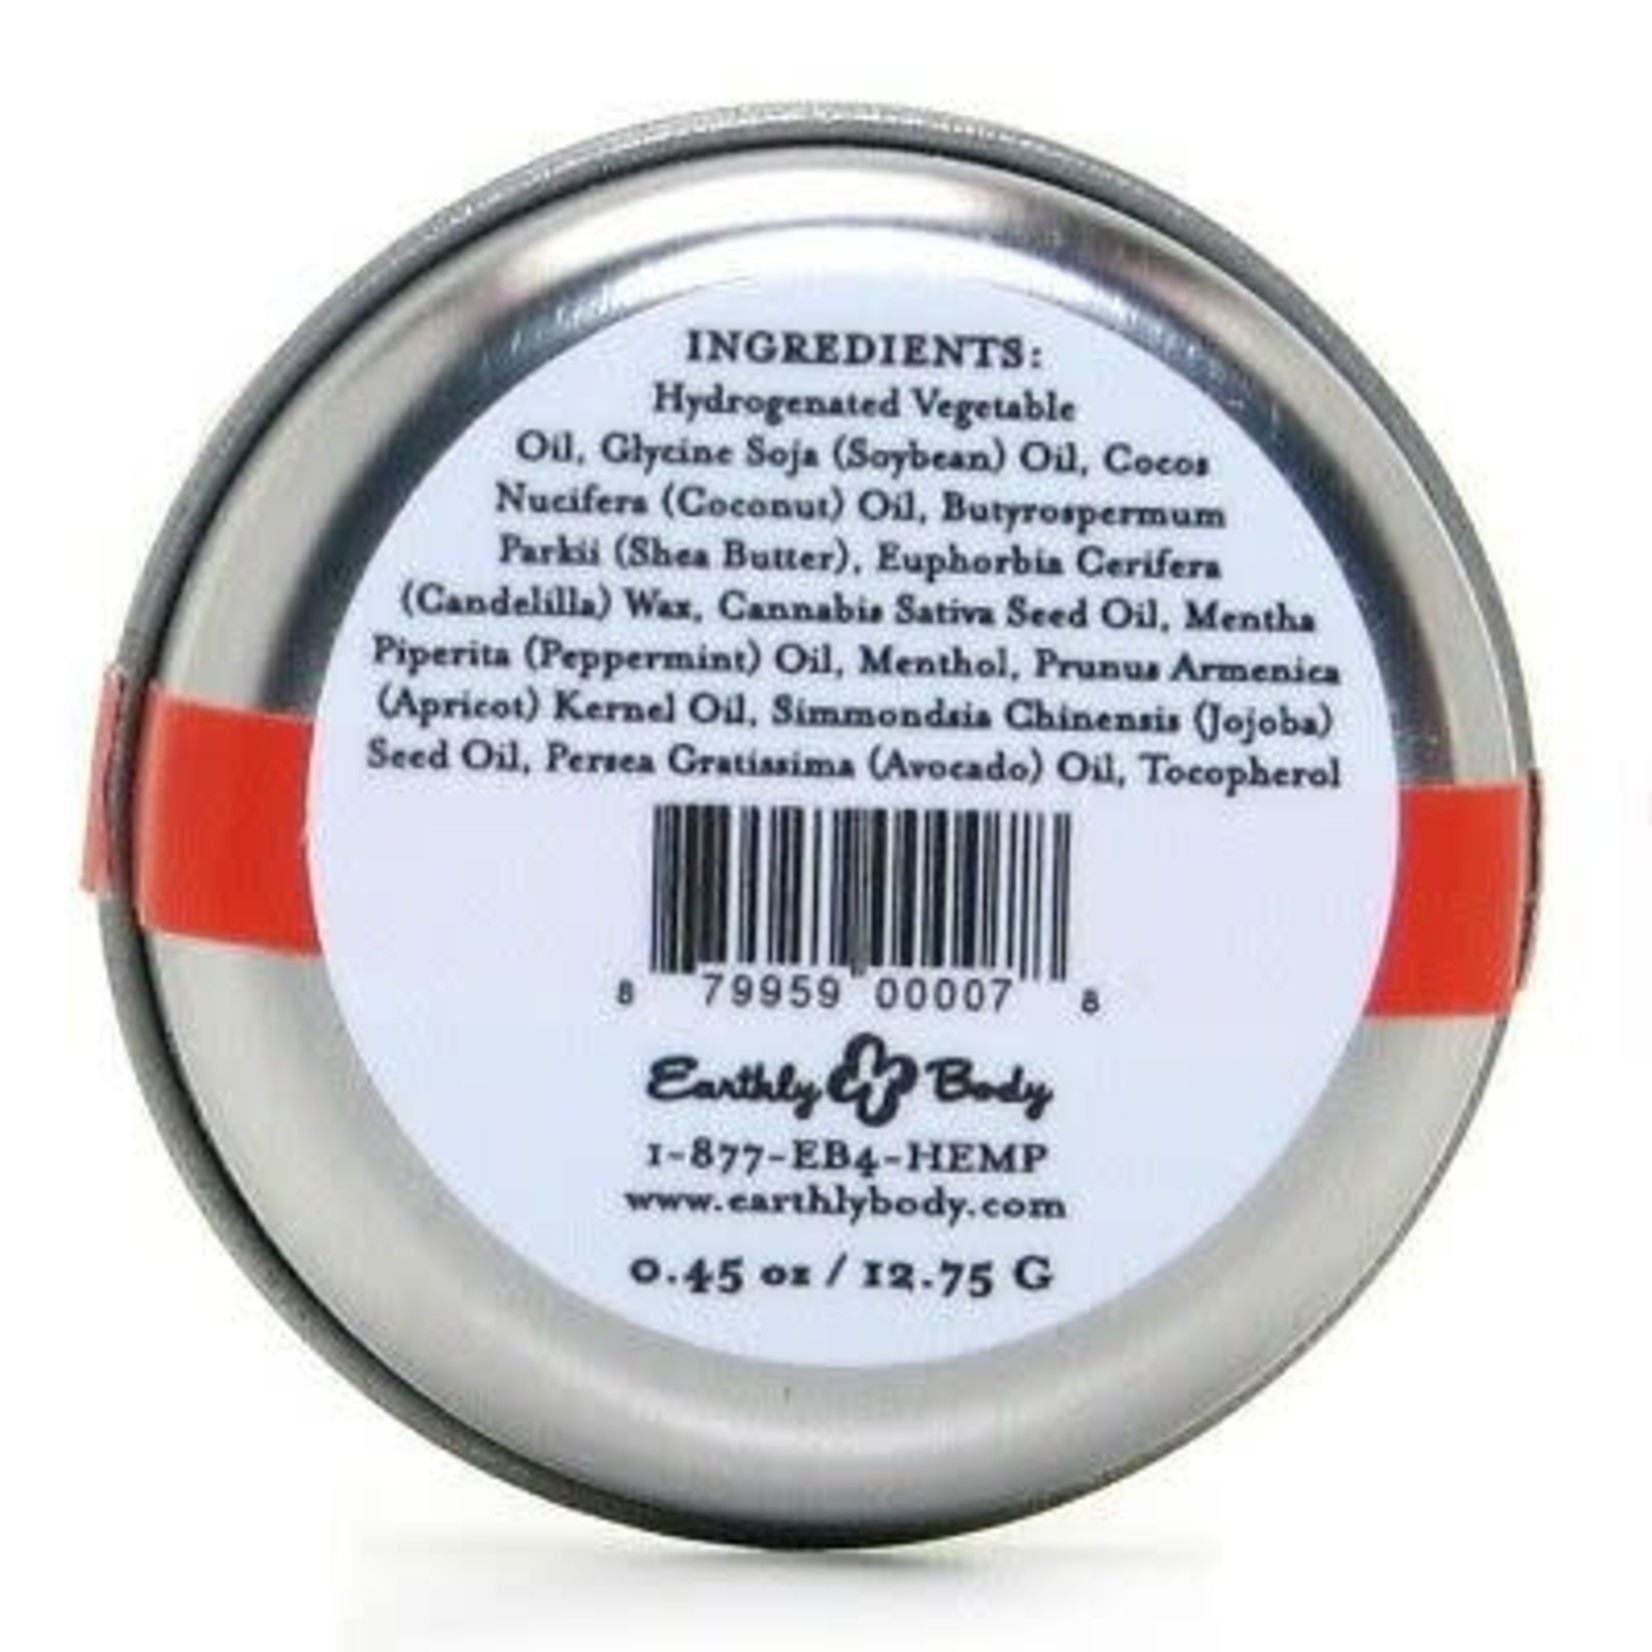 EARTHLY BODY EARTHLY BODY - LOVE BUTTON - AROUSAL BALM FOR HIM / HER